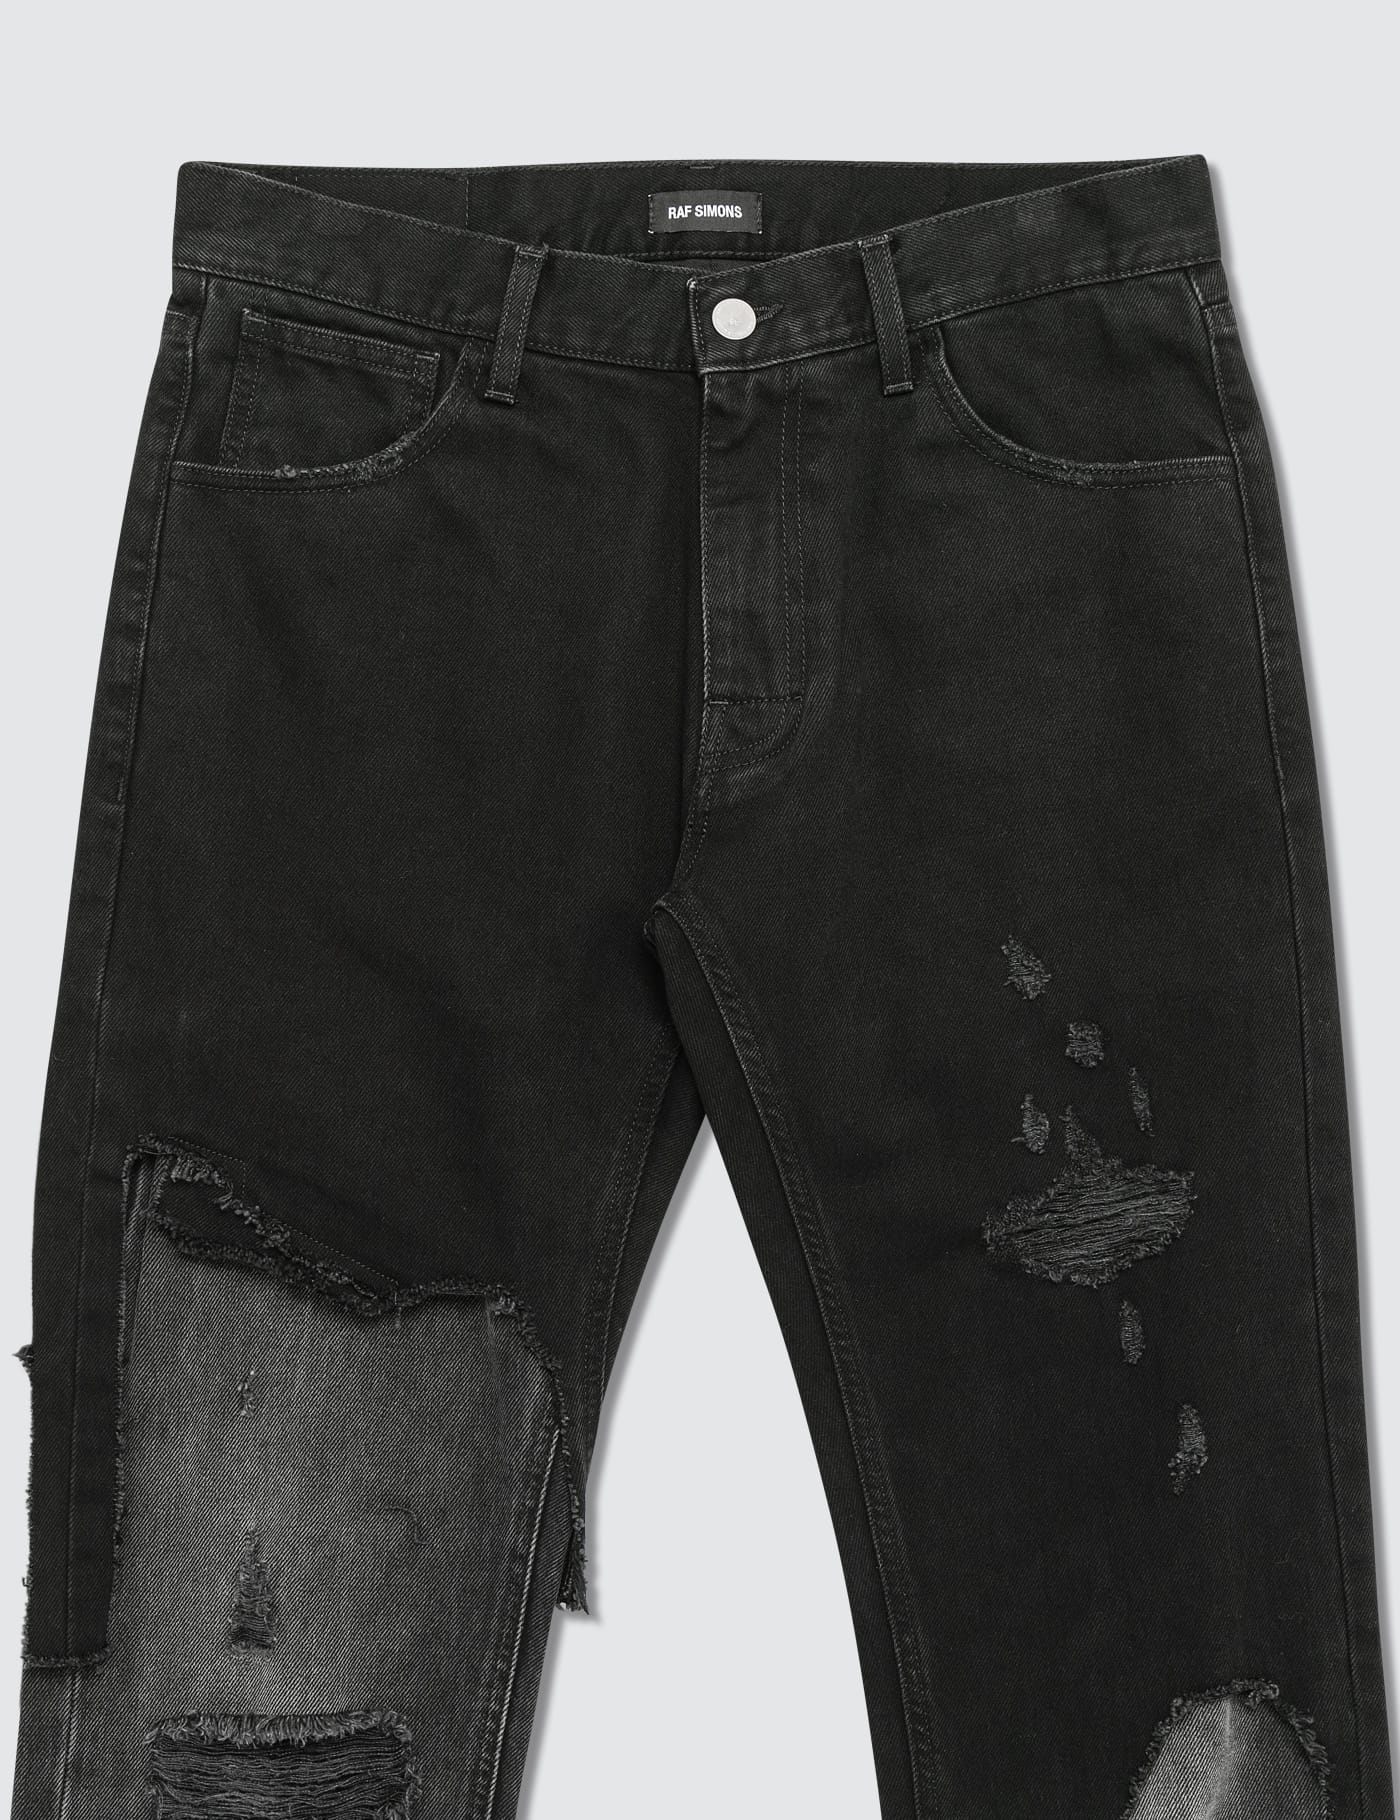 Raf Simons - Slim Fit Destroyed Jeans | HBX - Globally Curated 